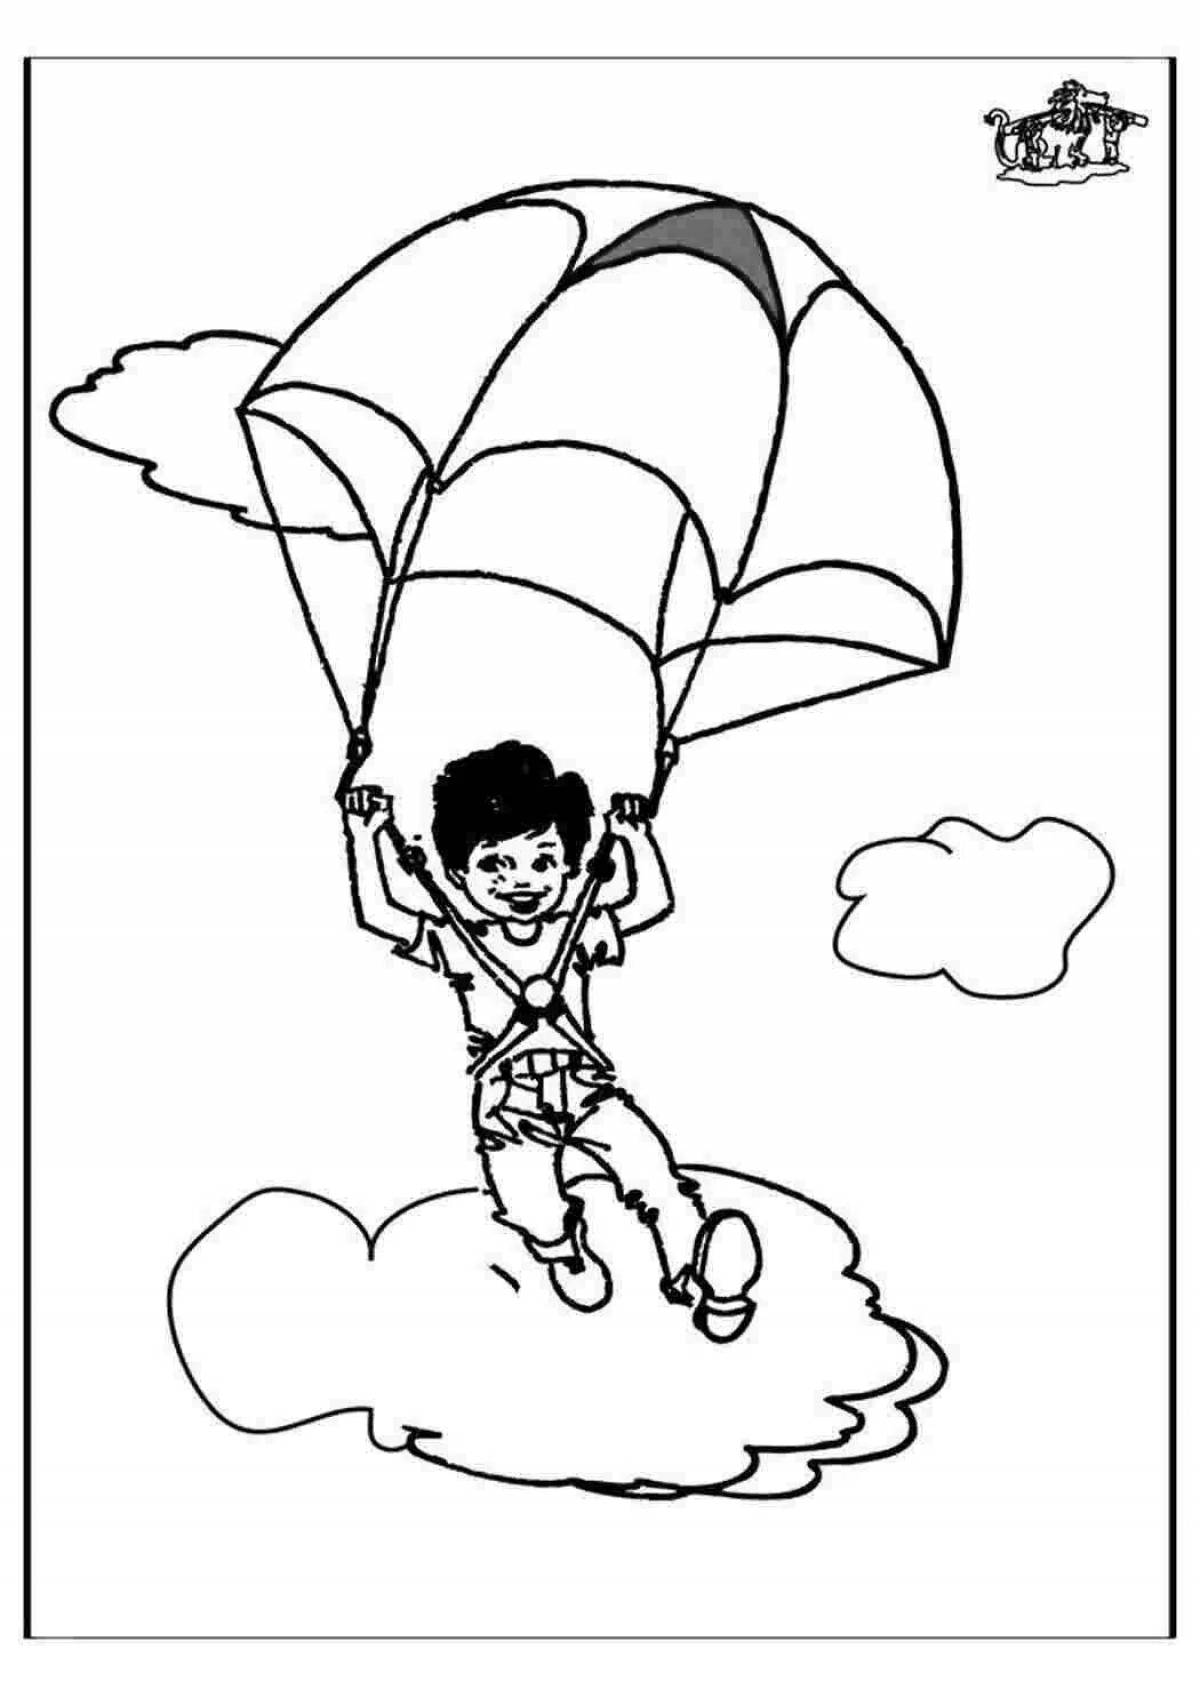 Coloring page cheerful skydiver